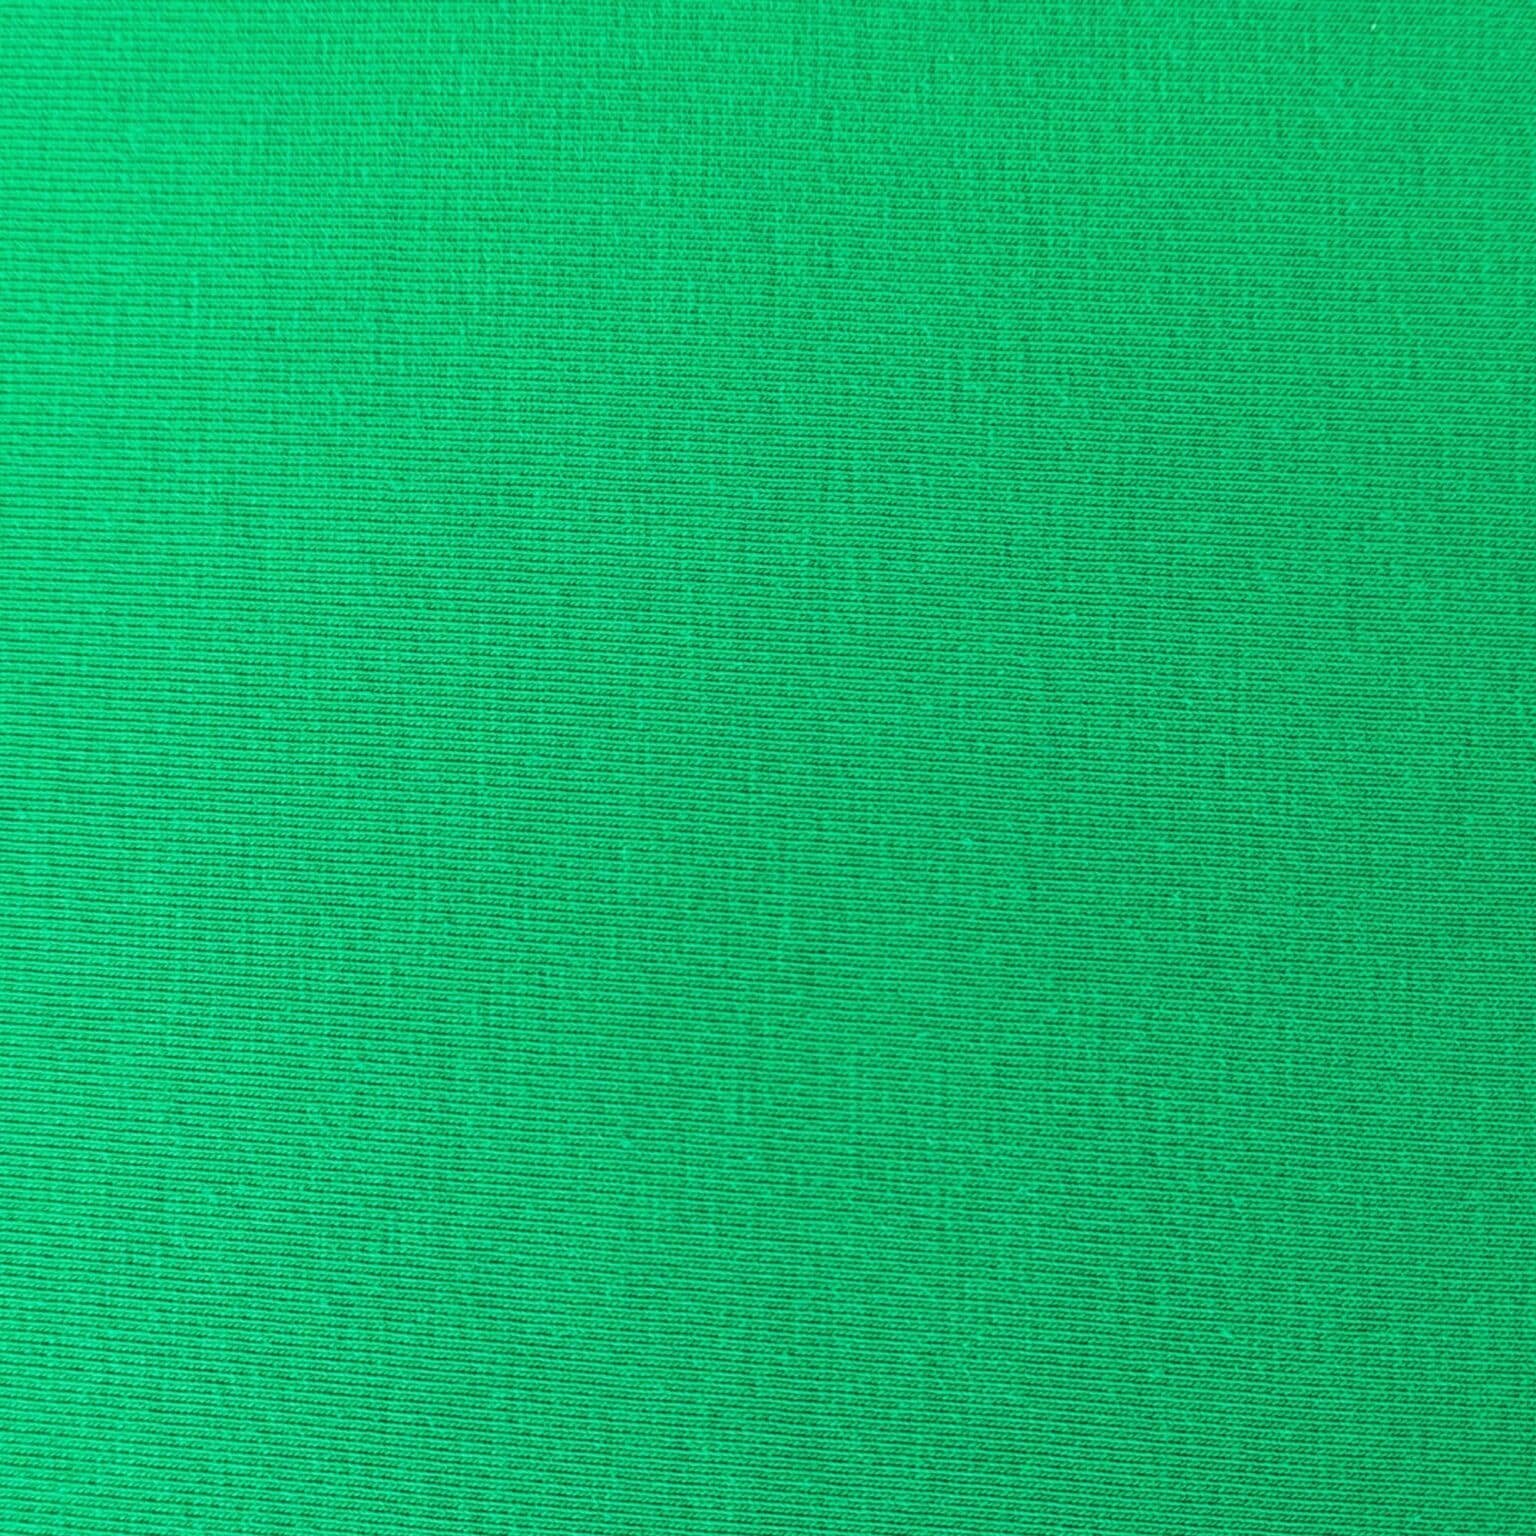 Cotton Jersey Fabric - Plain Green | More Sewing